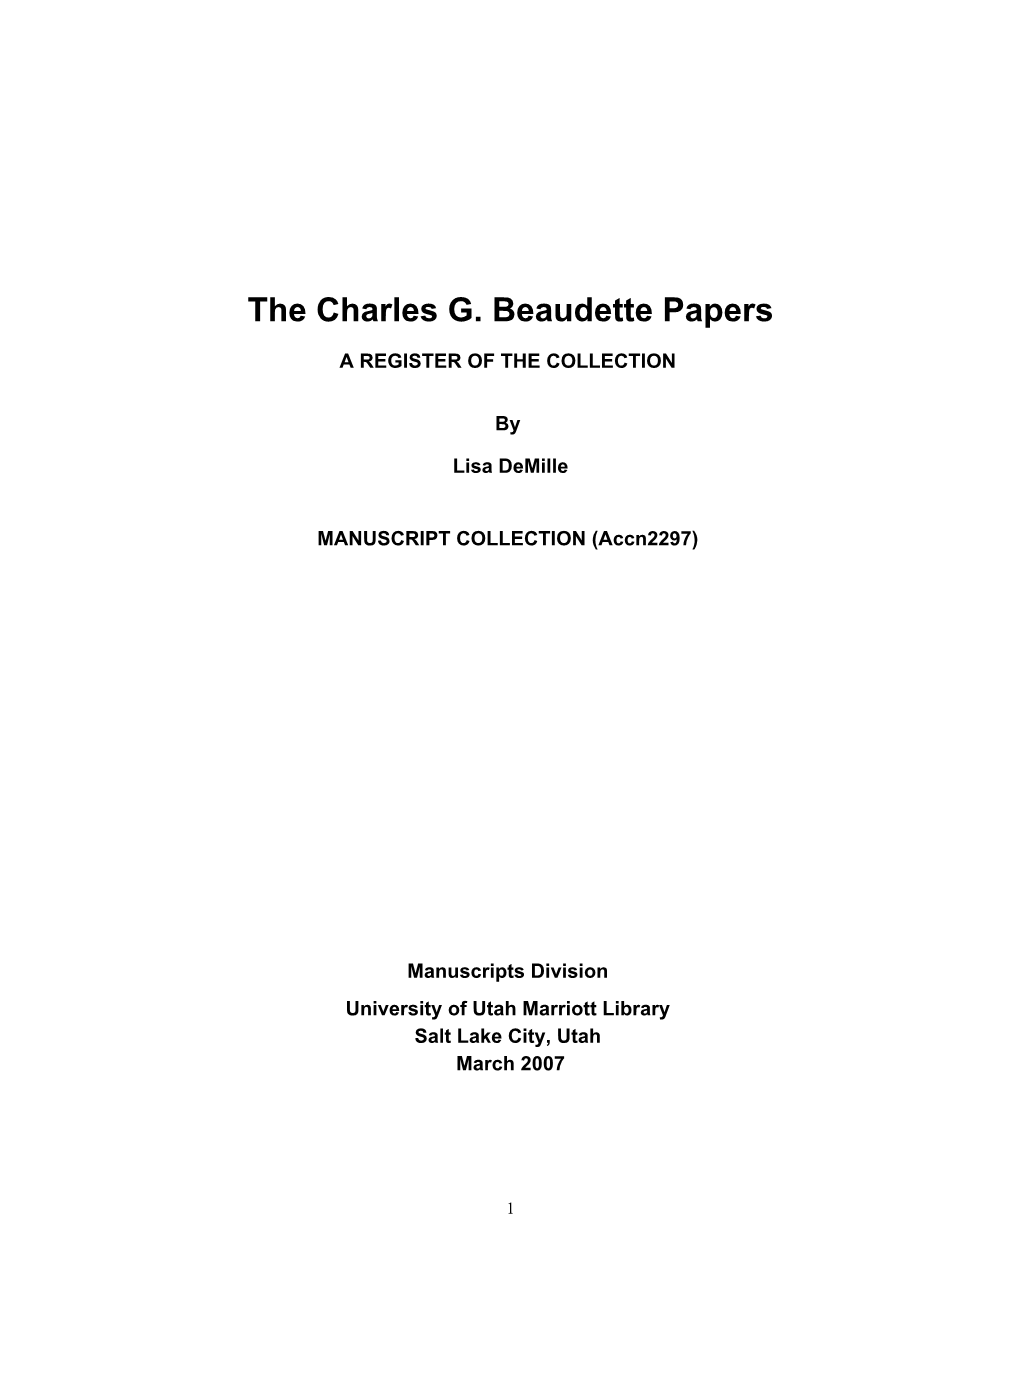 The Charles G. Beaudette Papers